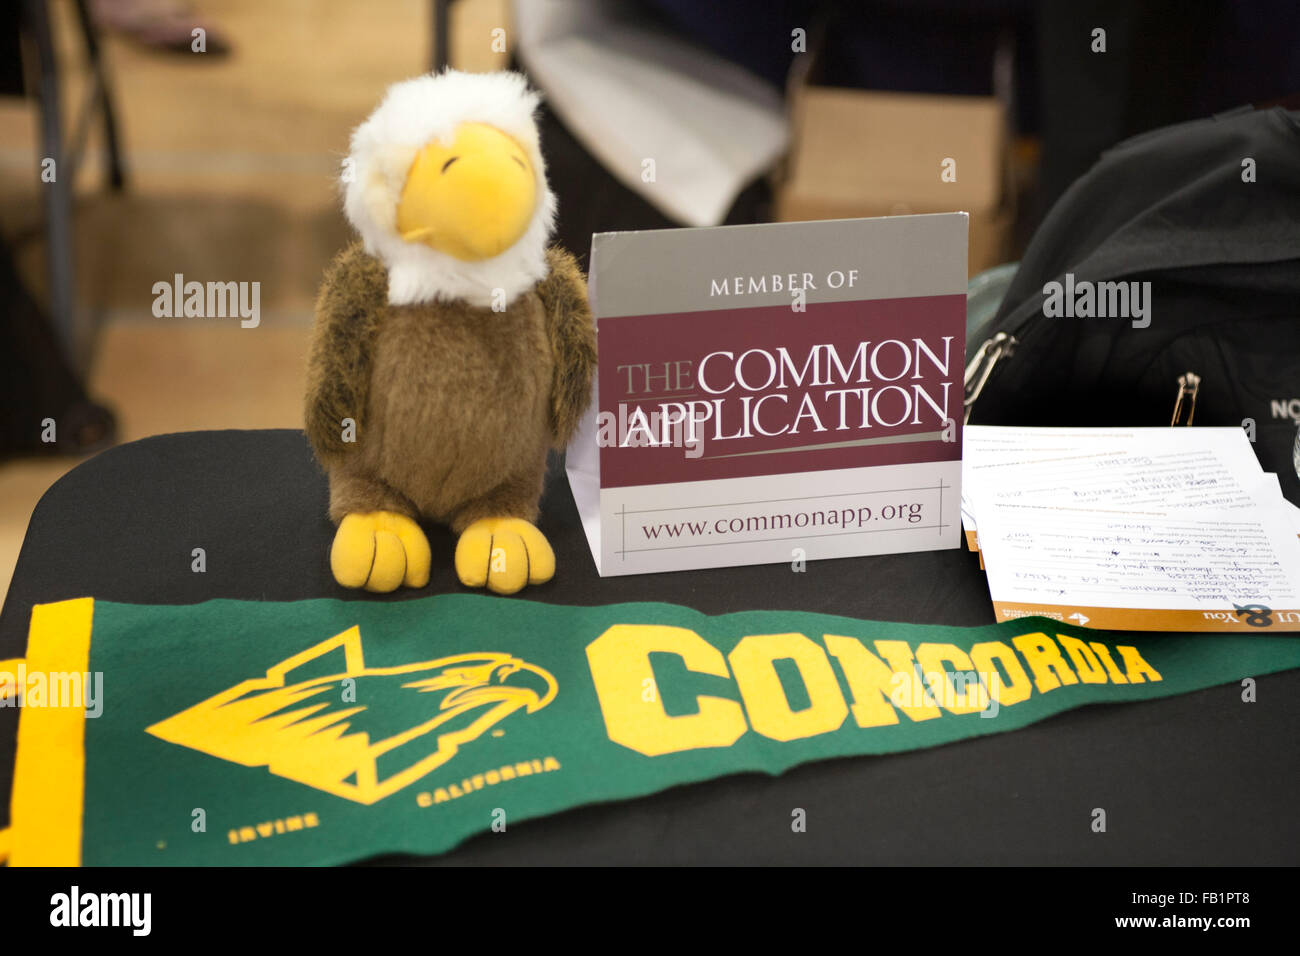 Concordia College in Irvine, CA, advertises it accepts the Common Application at a local college fair. The Common Application is an undergraduate college admission application that applicants may use to apply to any of 517 member colleges. Note pennant and mascot. Stock Photo